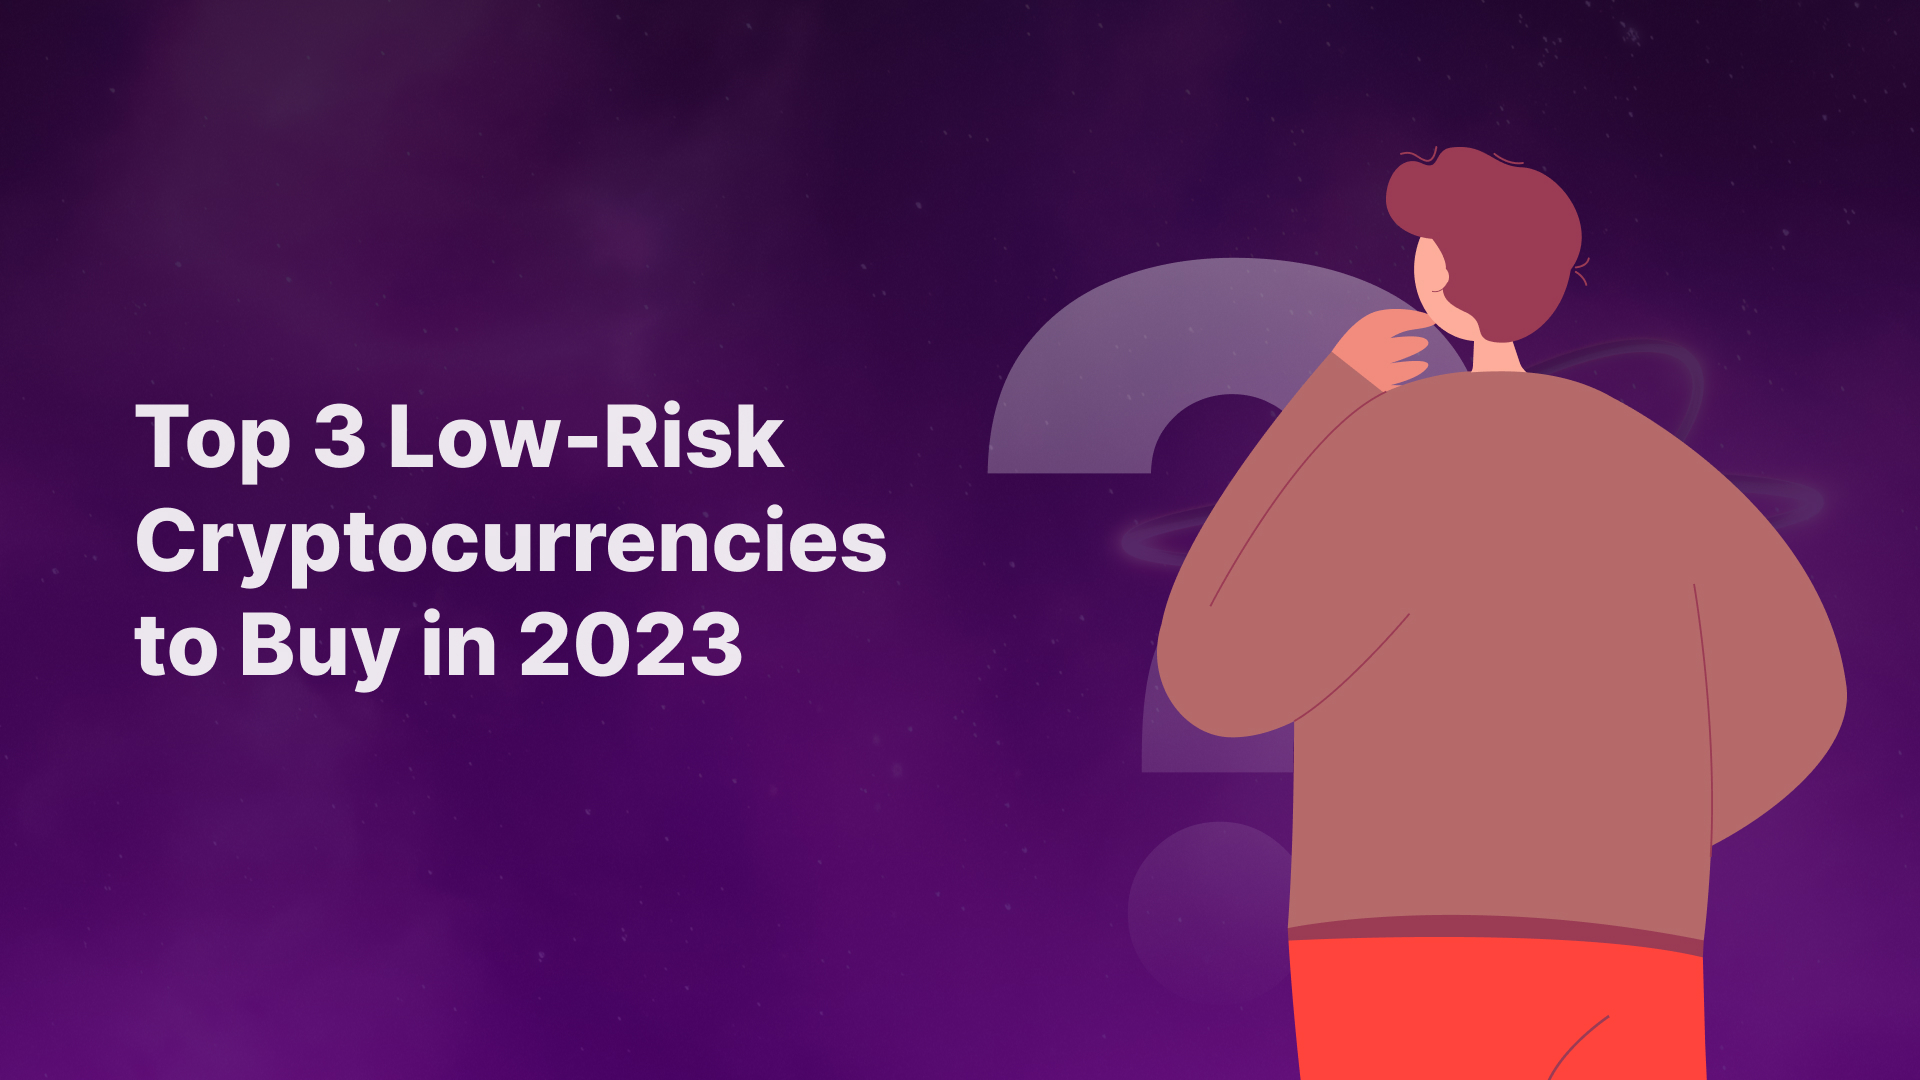 Top 3 Low-Risk Cryptocurrencies to Buy in 2023